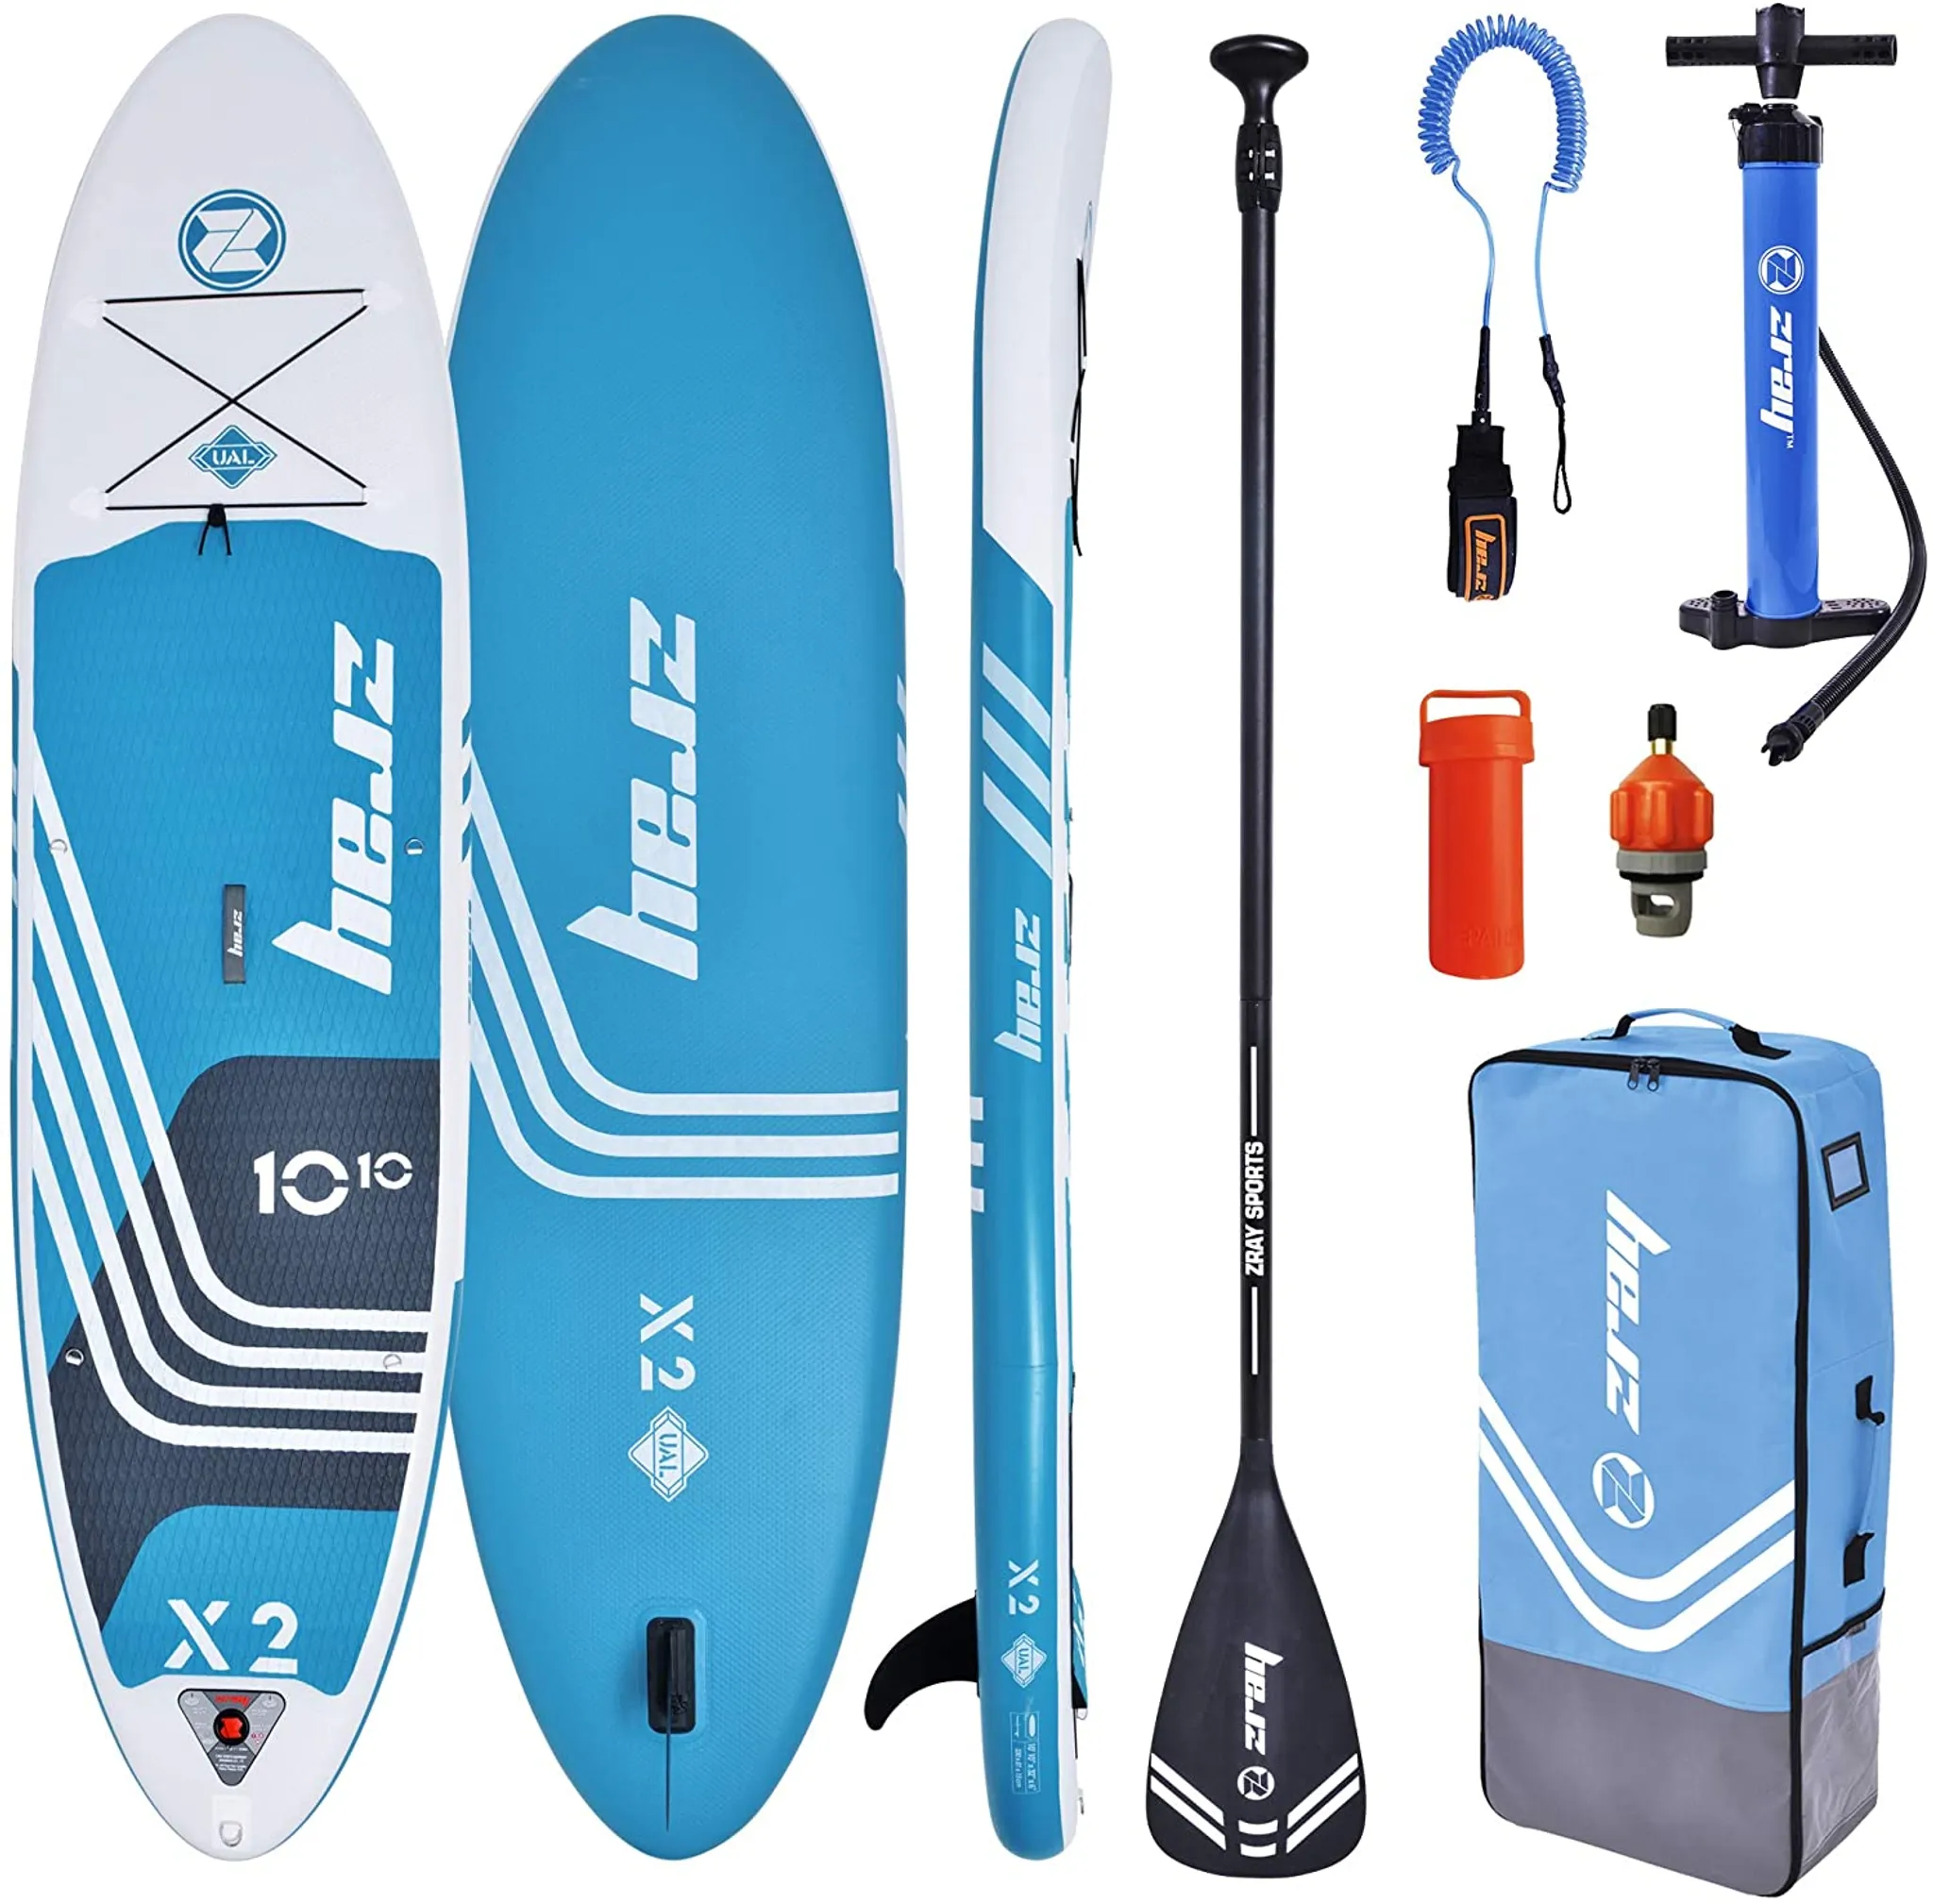 Zray X2 10.10 SUP Board Paddle Stand Up